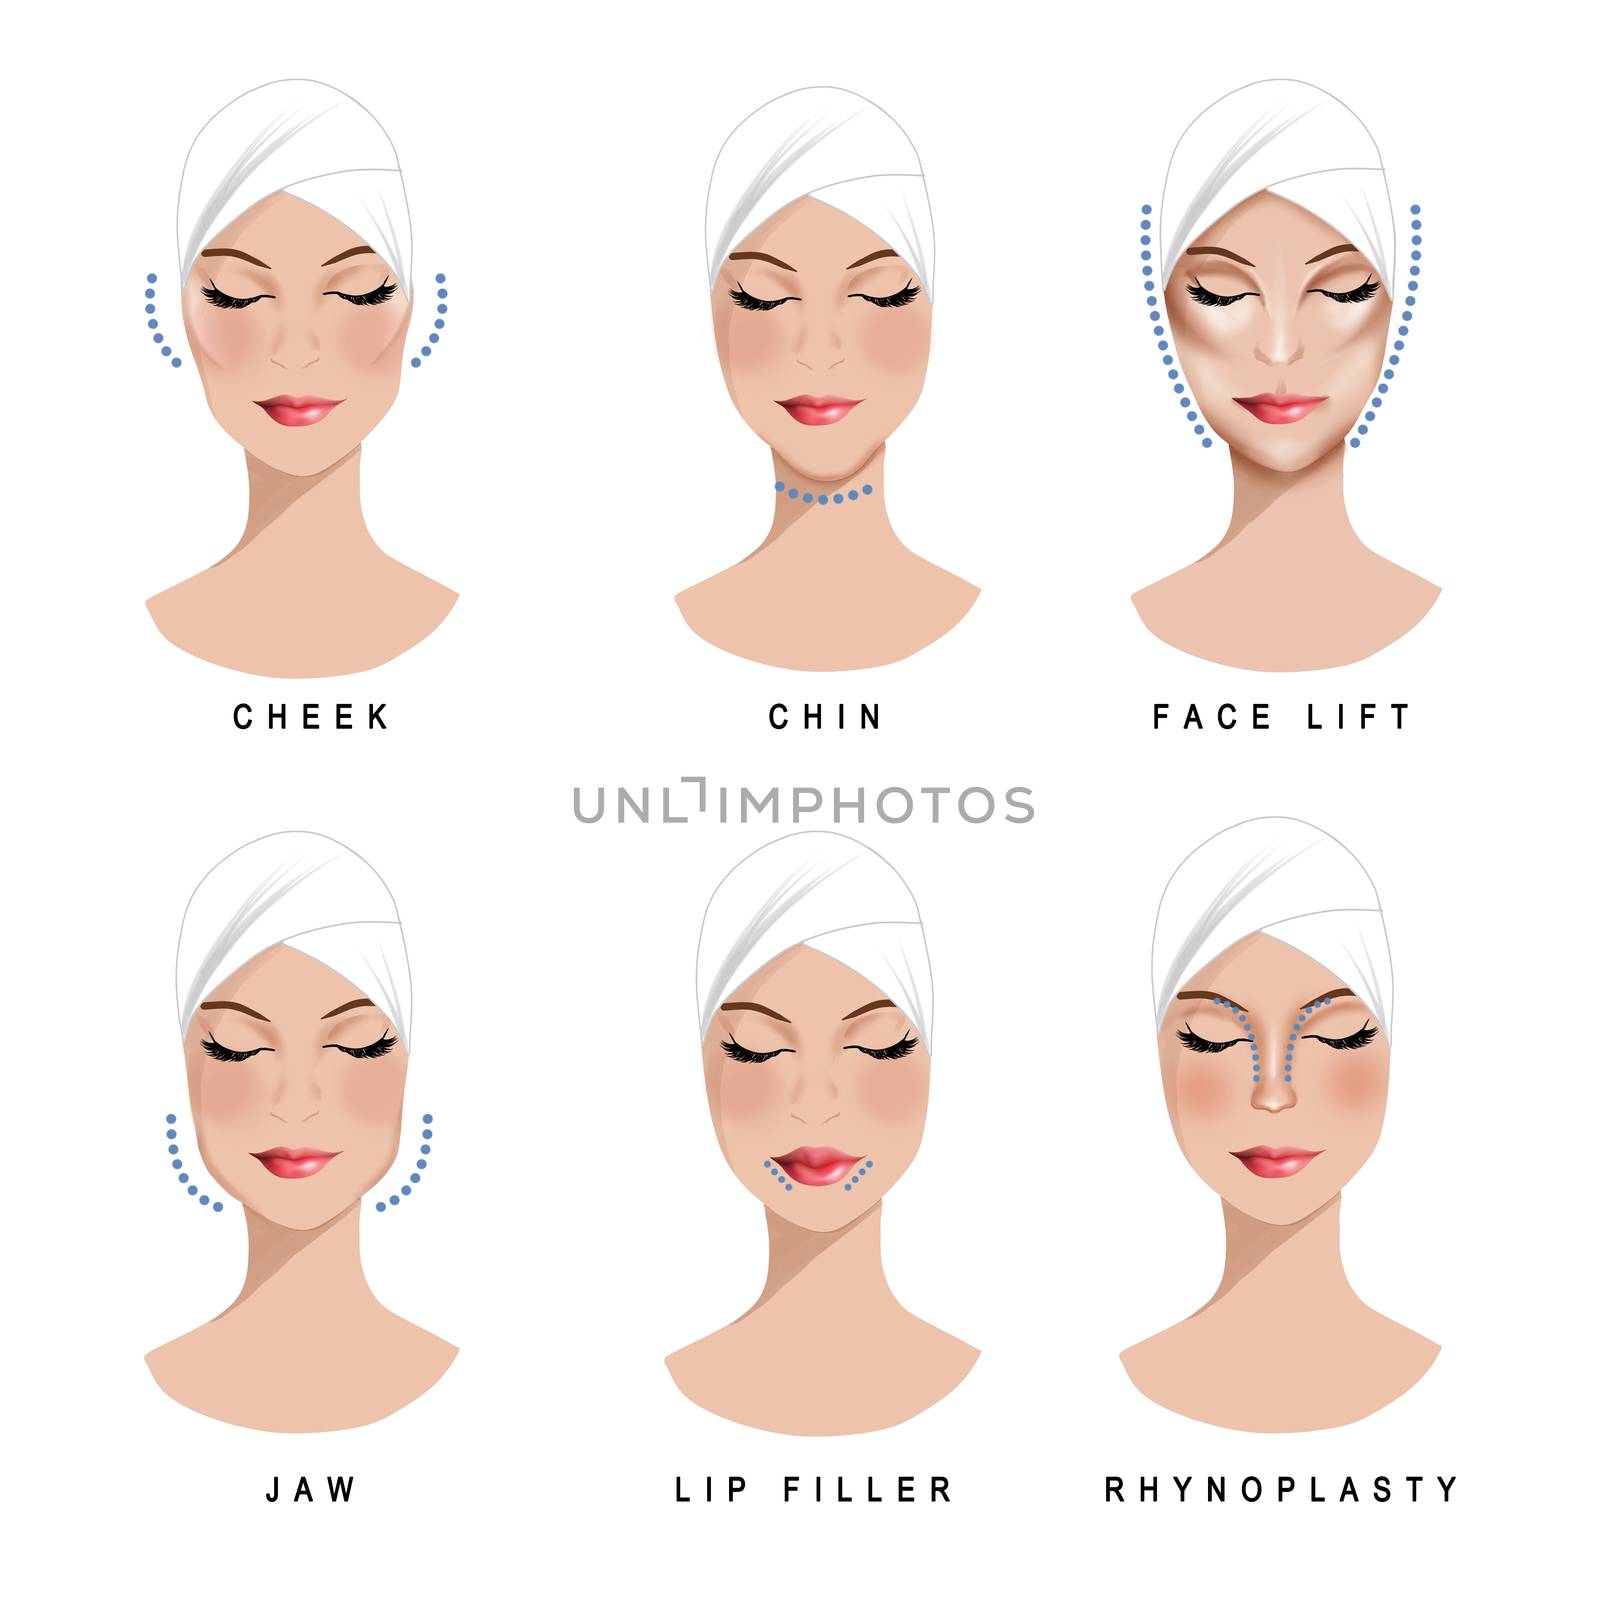 Beauty and surgery treatments set of clipart